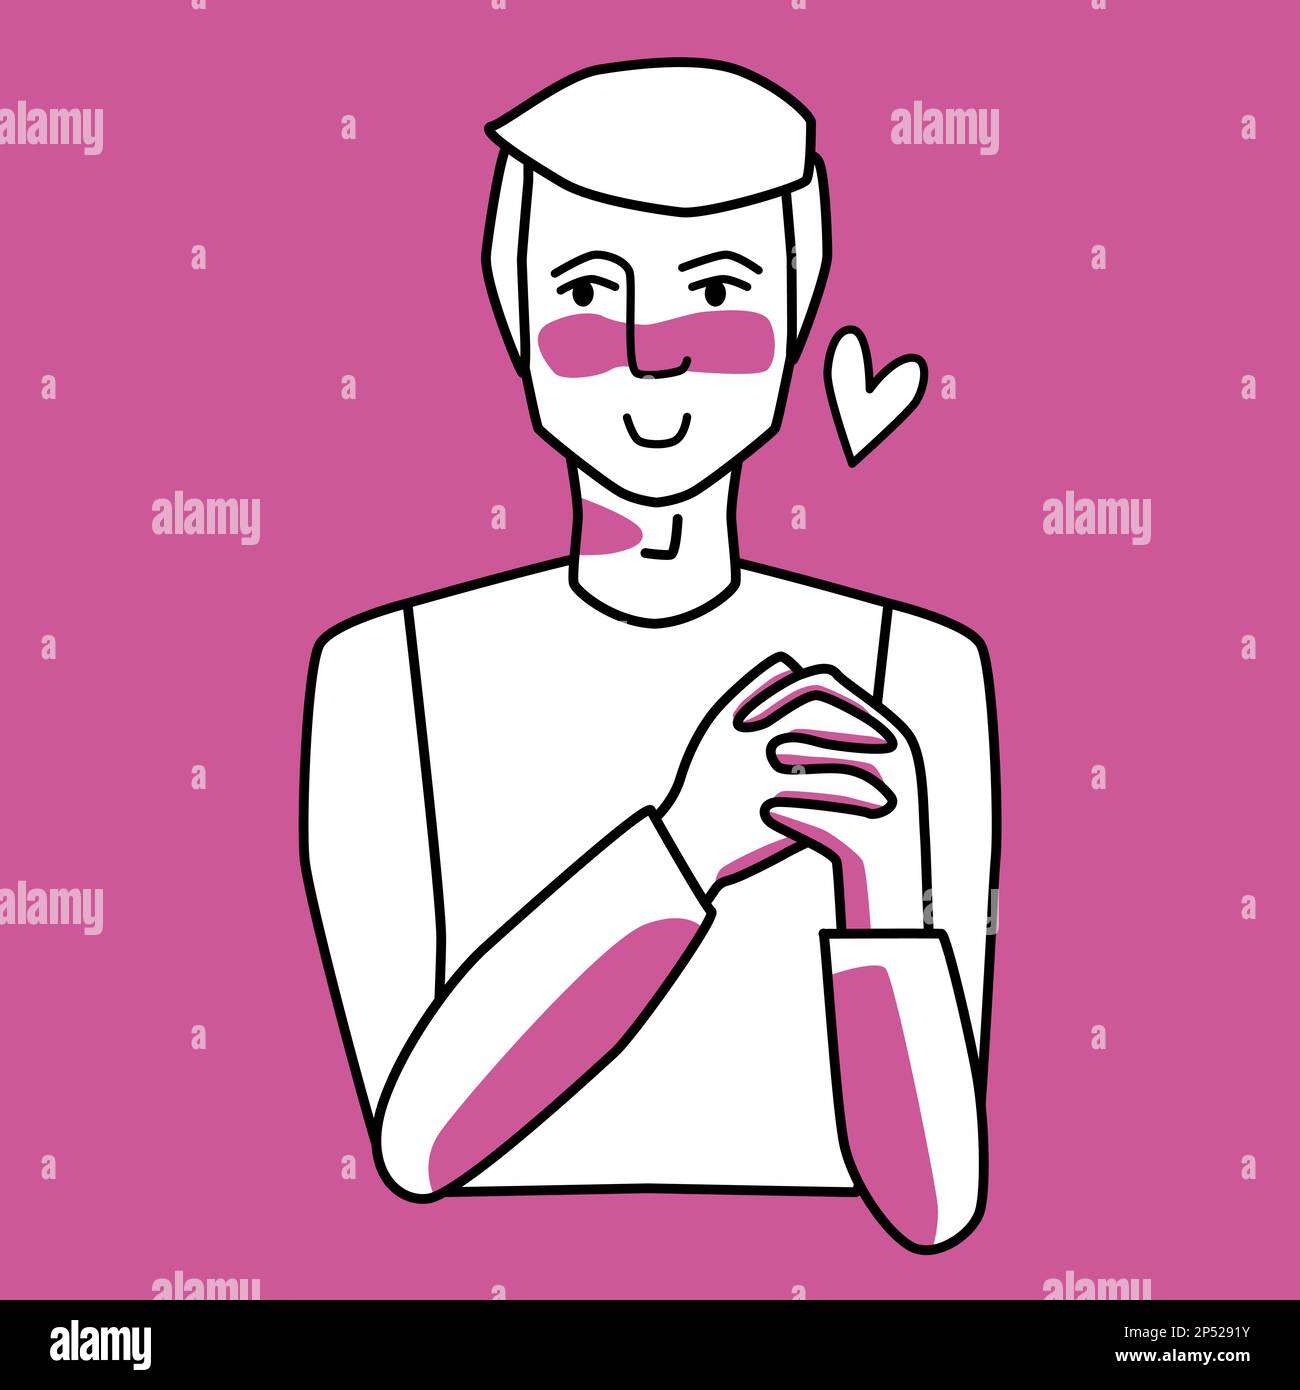 Adult male in love, holding his hands, pink and white. Line art, hand drawn sketch style illustration. Stock Vector